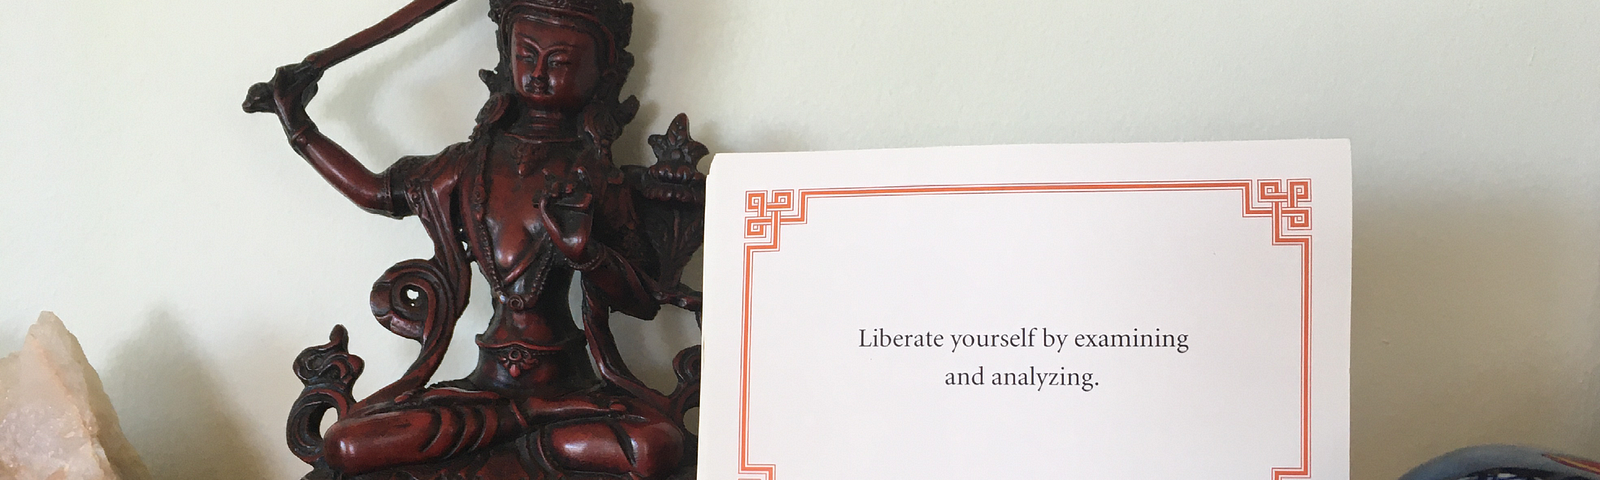 A Lojong card that reads “Liberate yourself by examining and analyzing” sits on a wooden shrine, to the right of a statue of the Bodhisattva Manjushri.